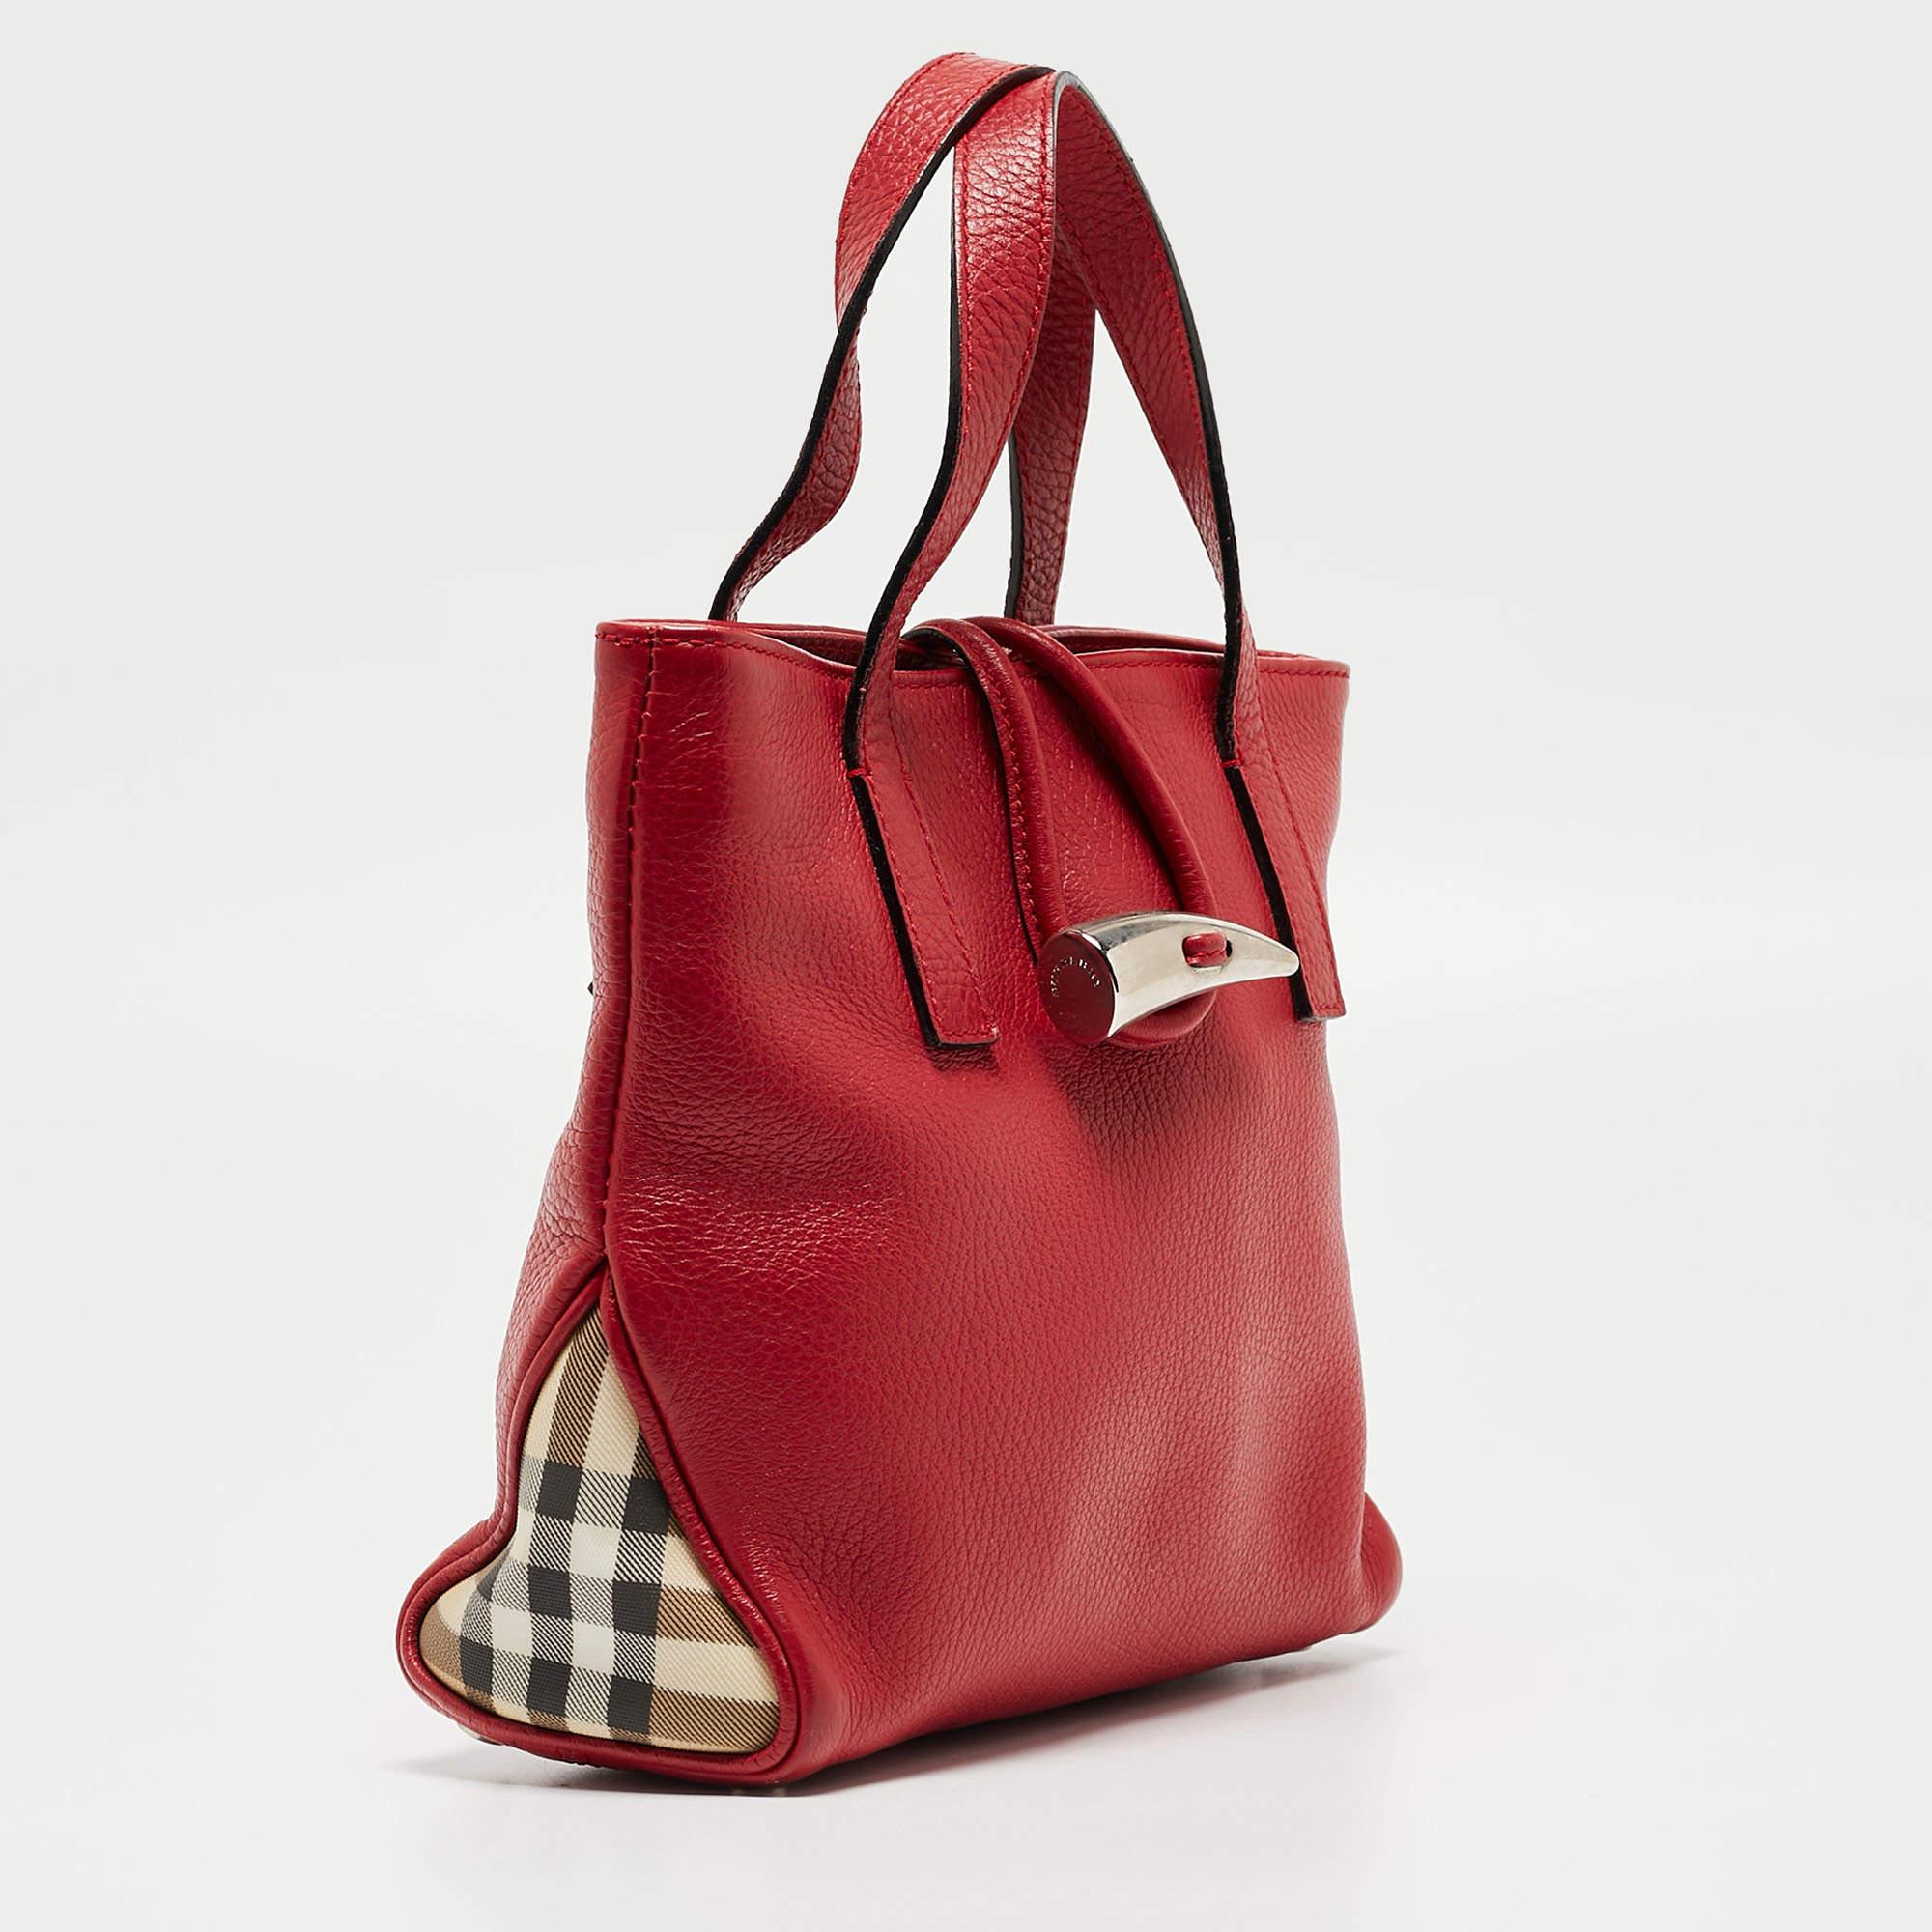 Women's Burberry Red Leather Shark Tooth Tote